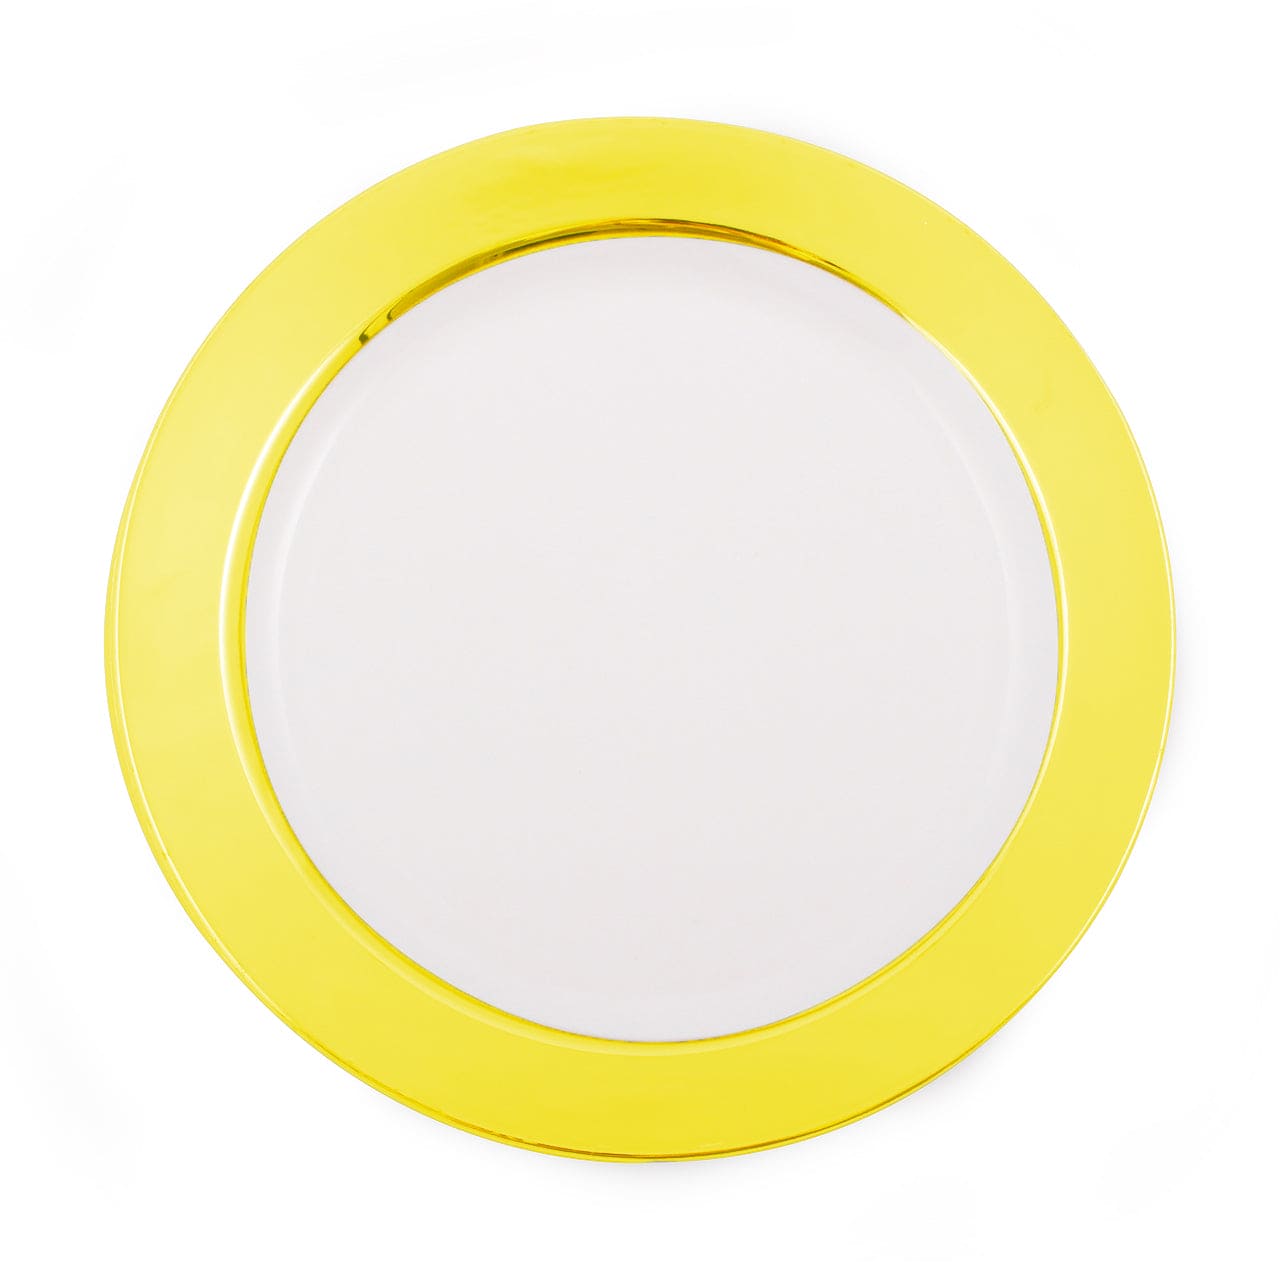 White with Solid Gold Border 7.5in Round Plastic Plates 10ct